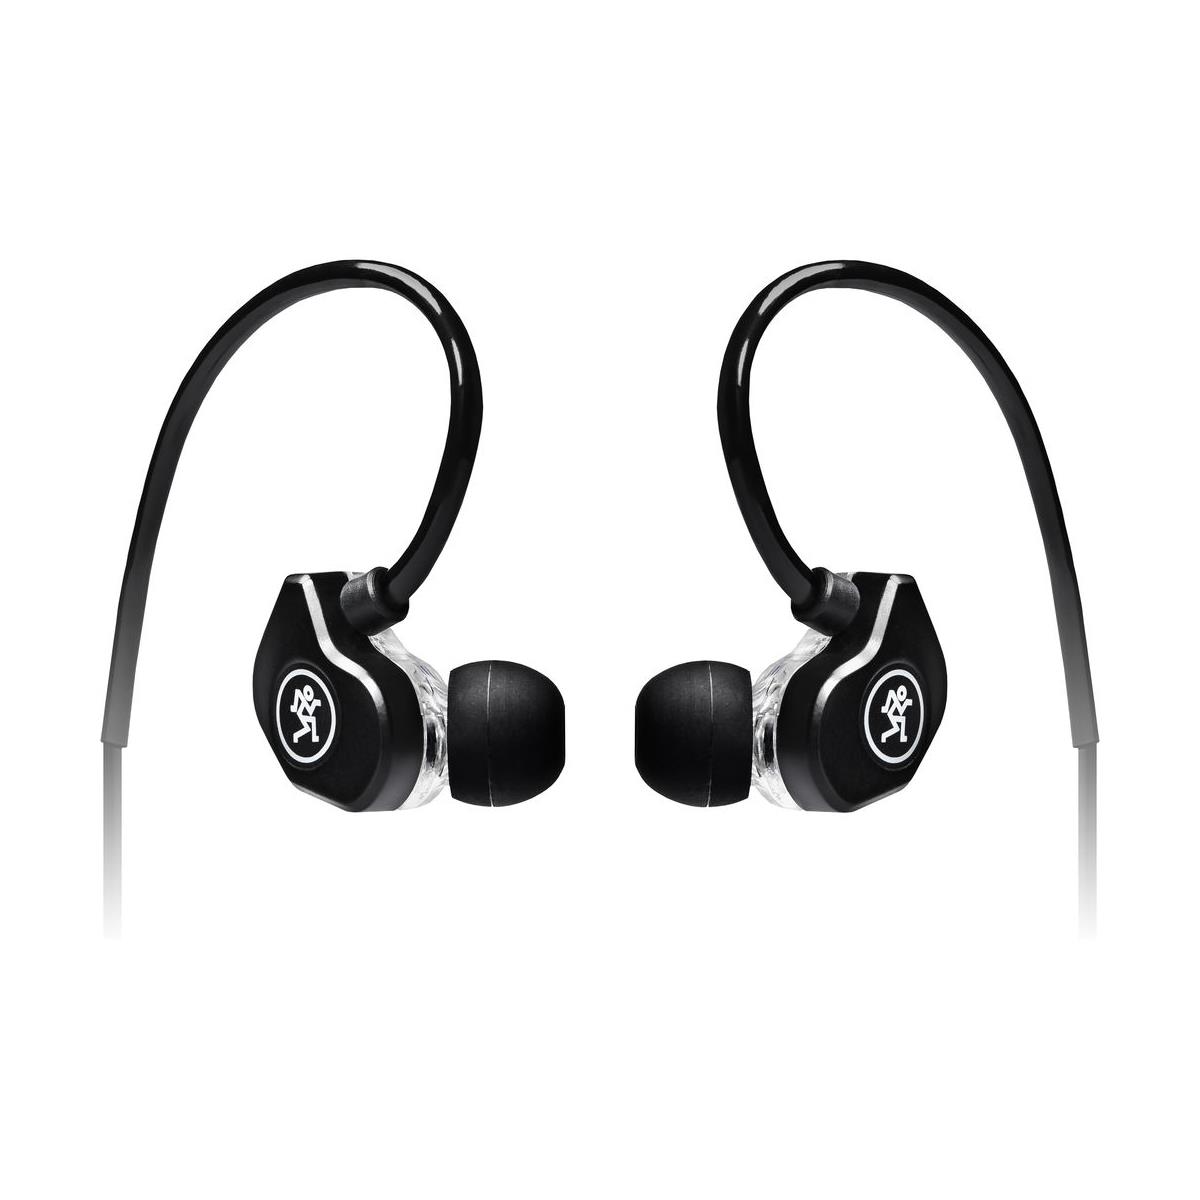 Image of Mackie CR-Buds+ Dual Dynamic Driver Professional Fit Earphones with Mic/Control